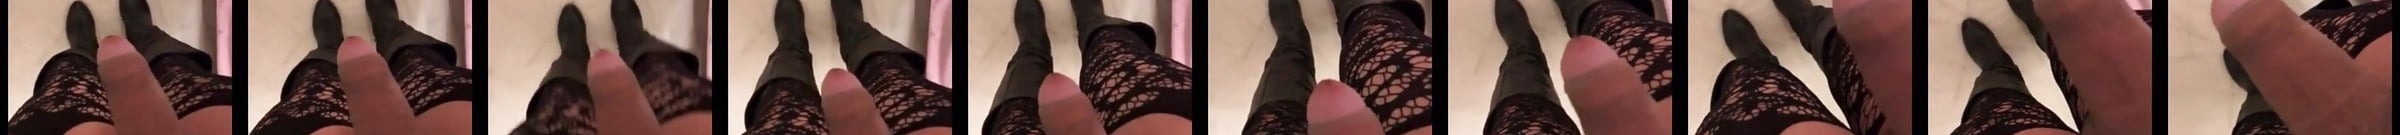 Sissy Upskirt Cock Walk In The Public Woods Gay Porn 66 Xhamster 